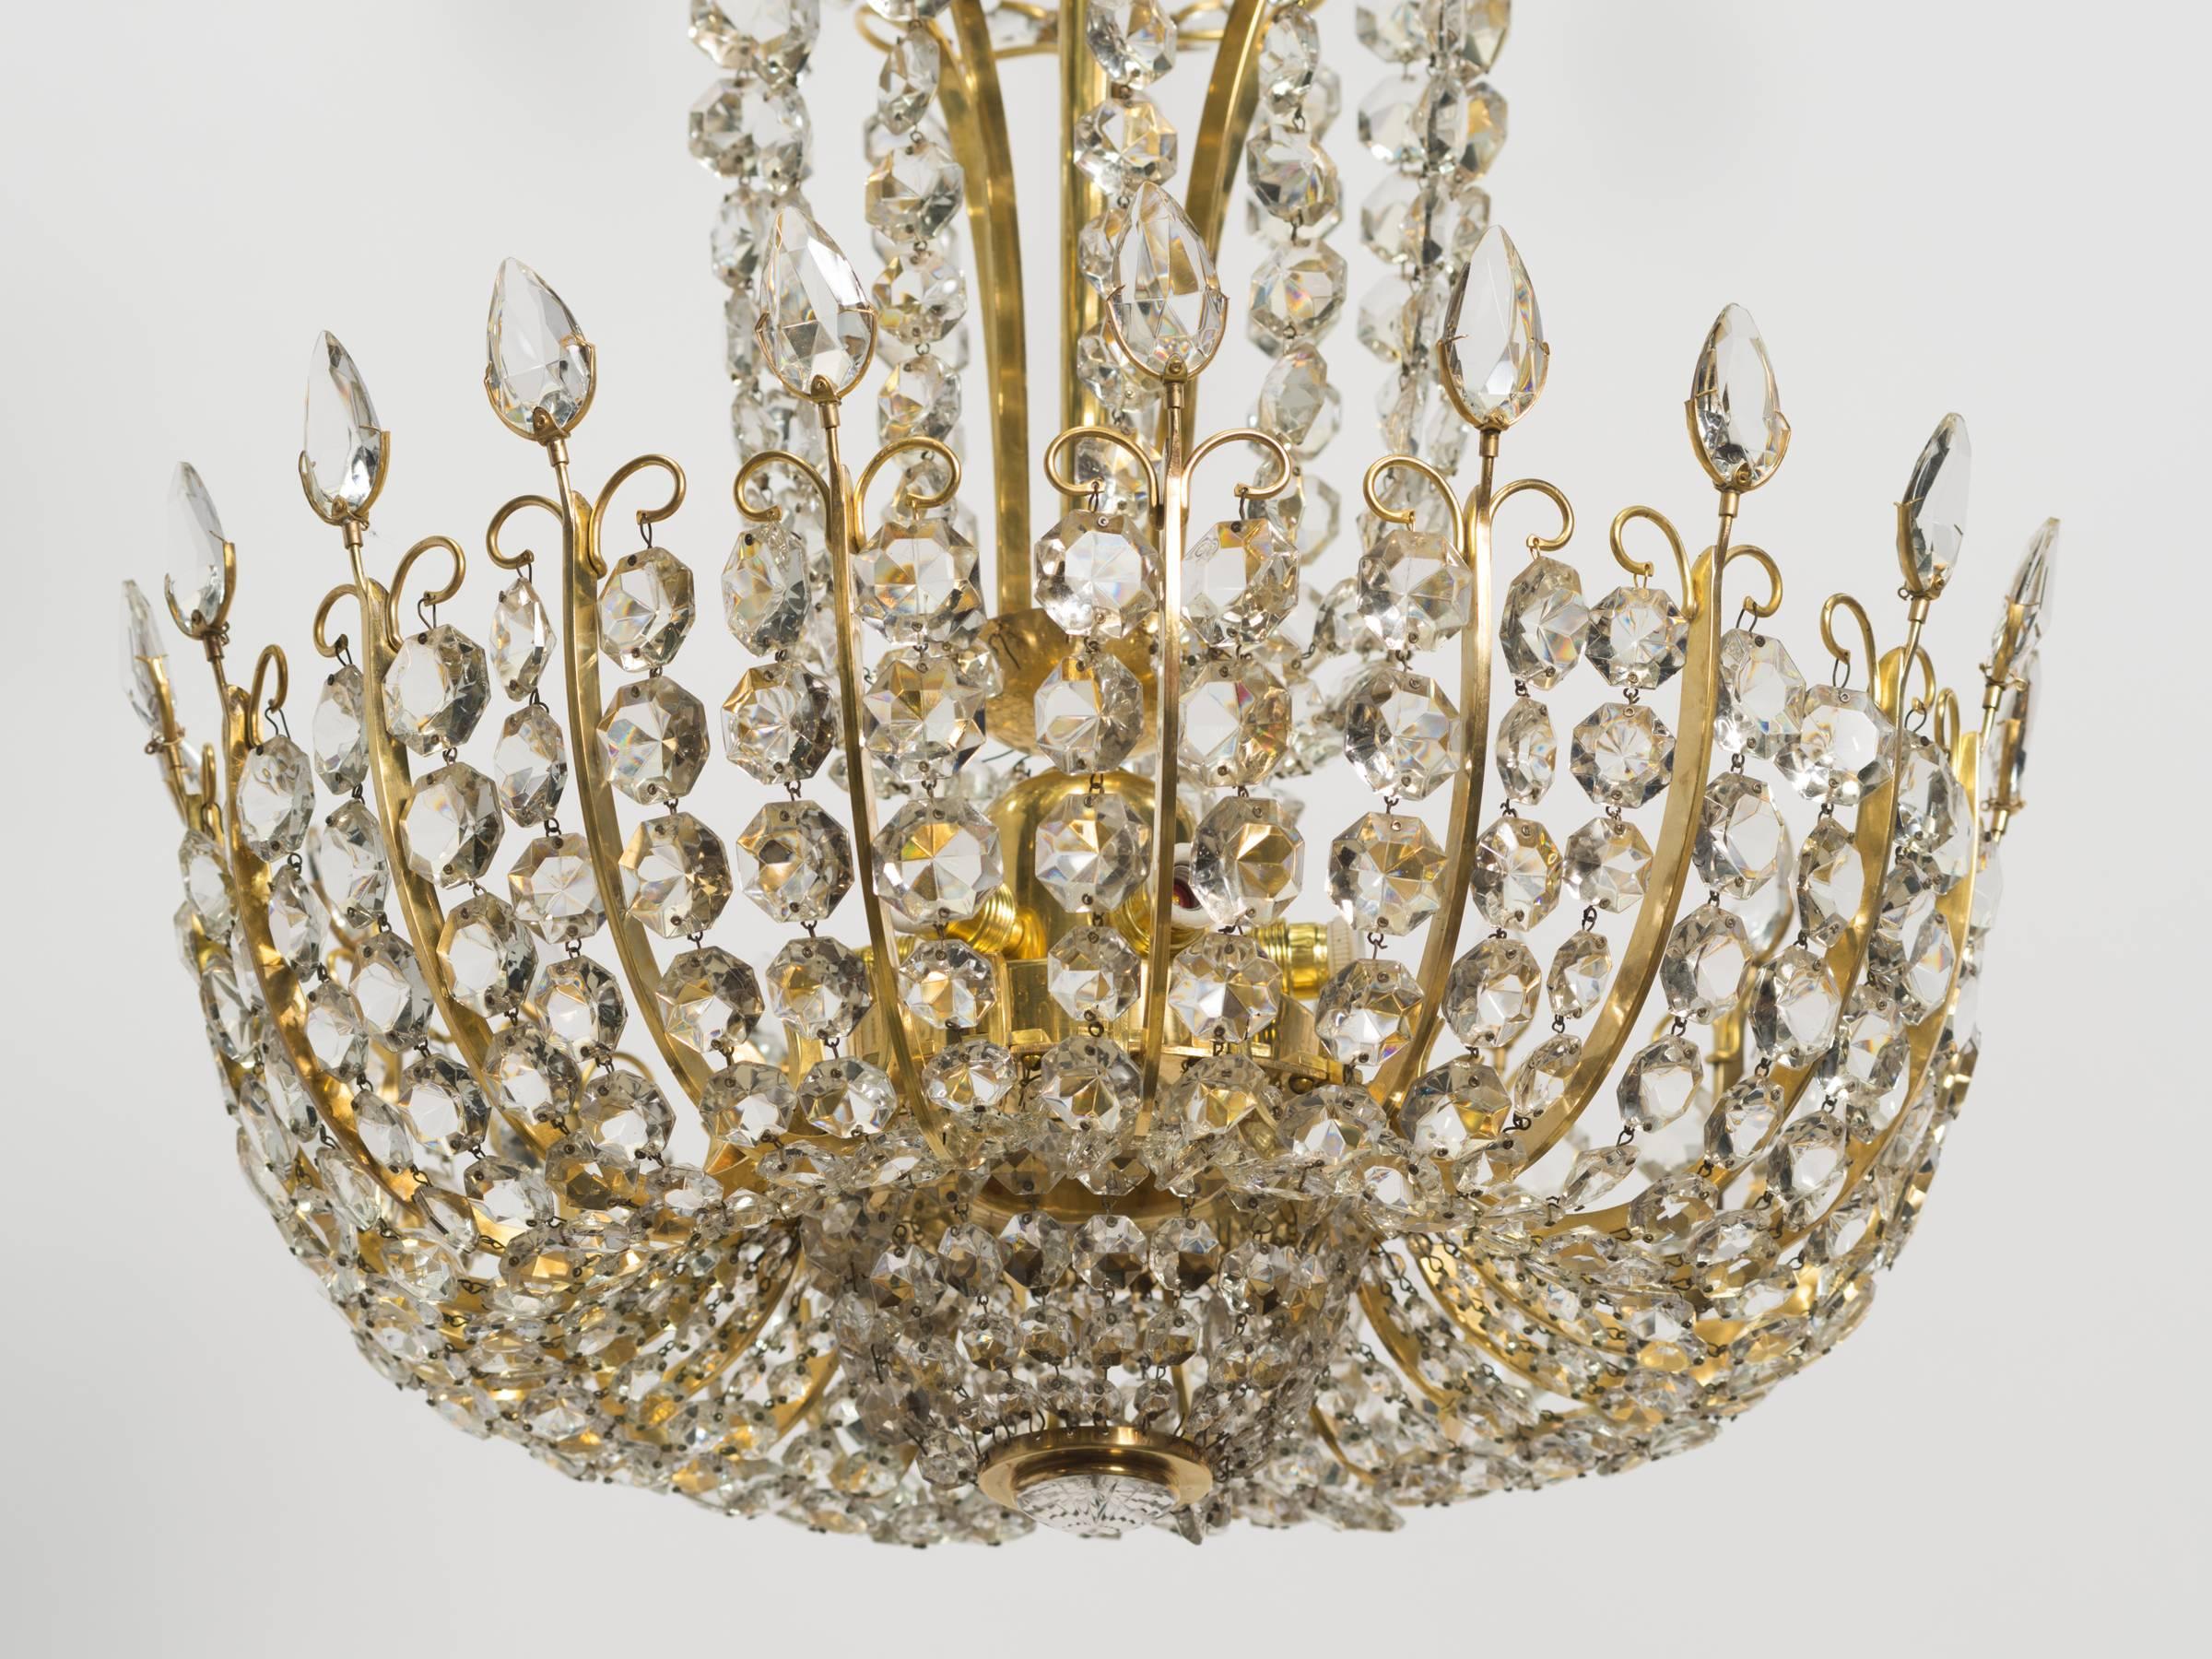 Pair of Elegant Crystal and Brass Chandeliers By Lobmeyr In Excellent Condition For Sale In Tarrytown, NY